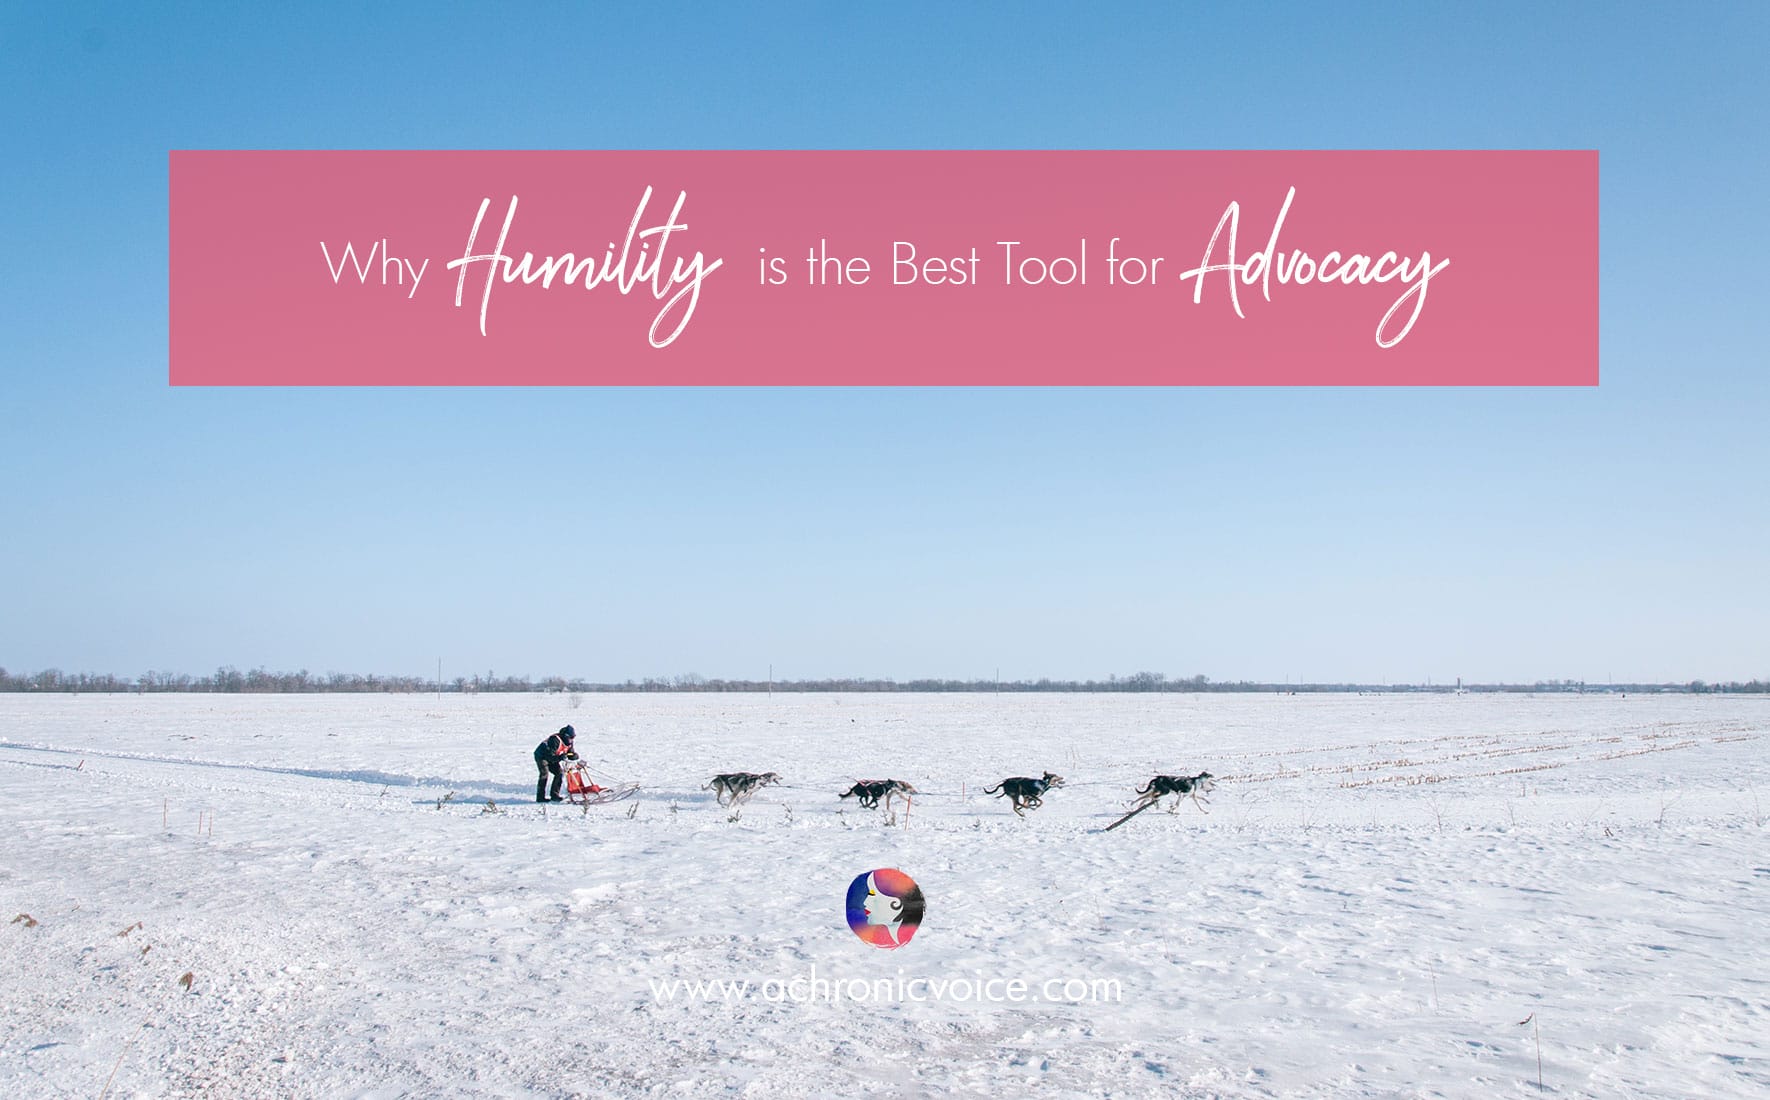 Why Humility is the Best Tool for Advocacy